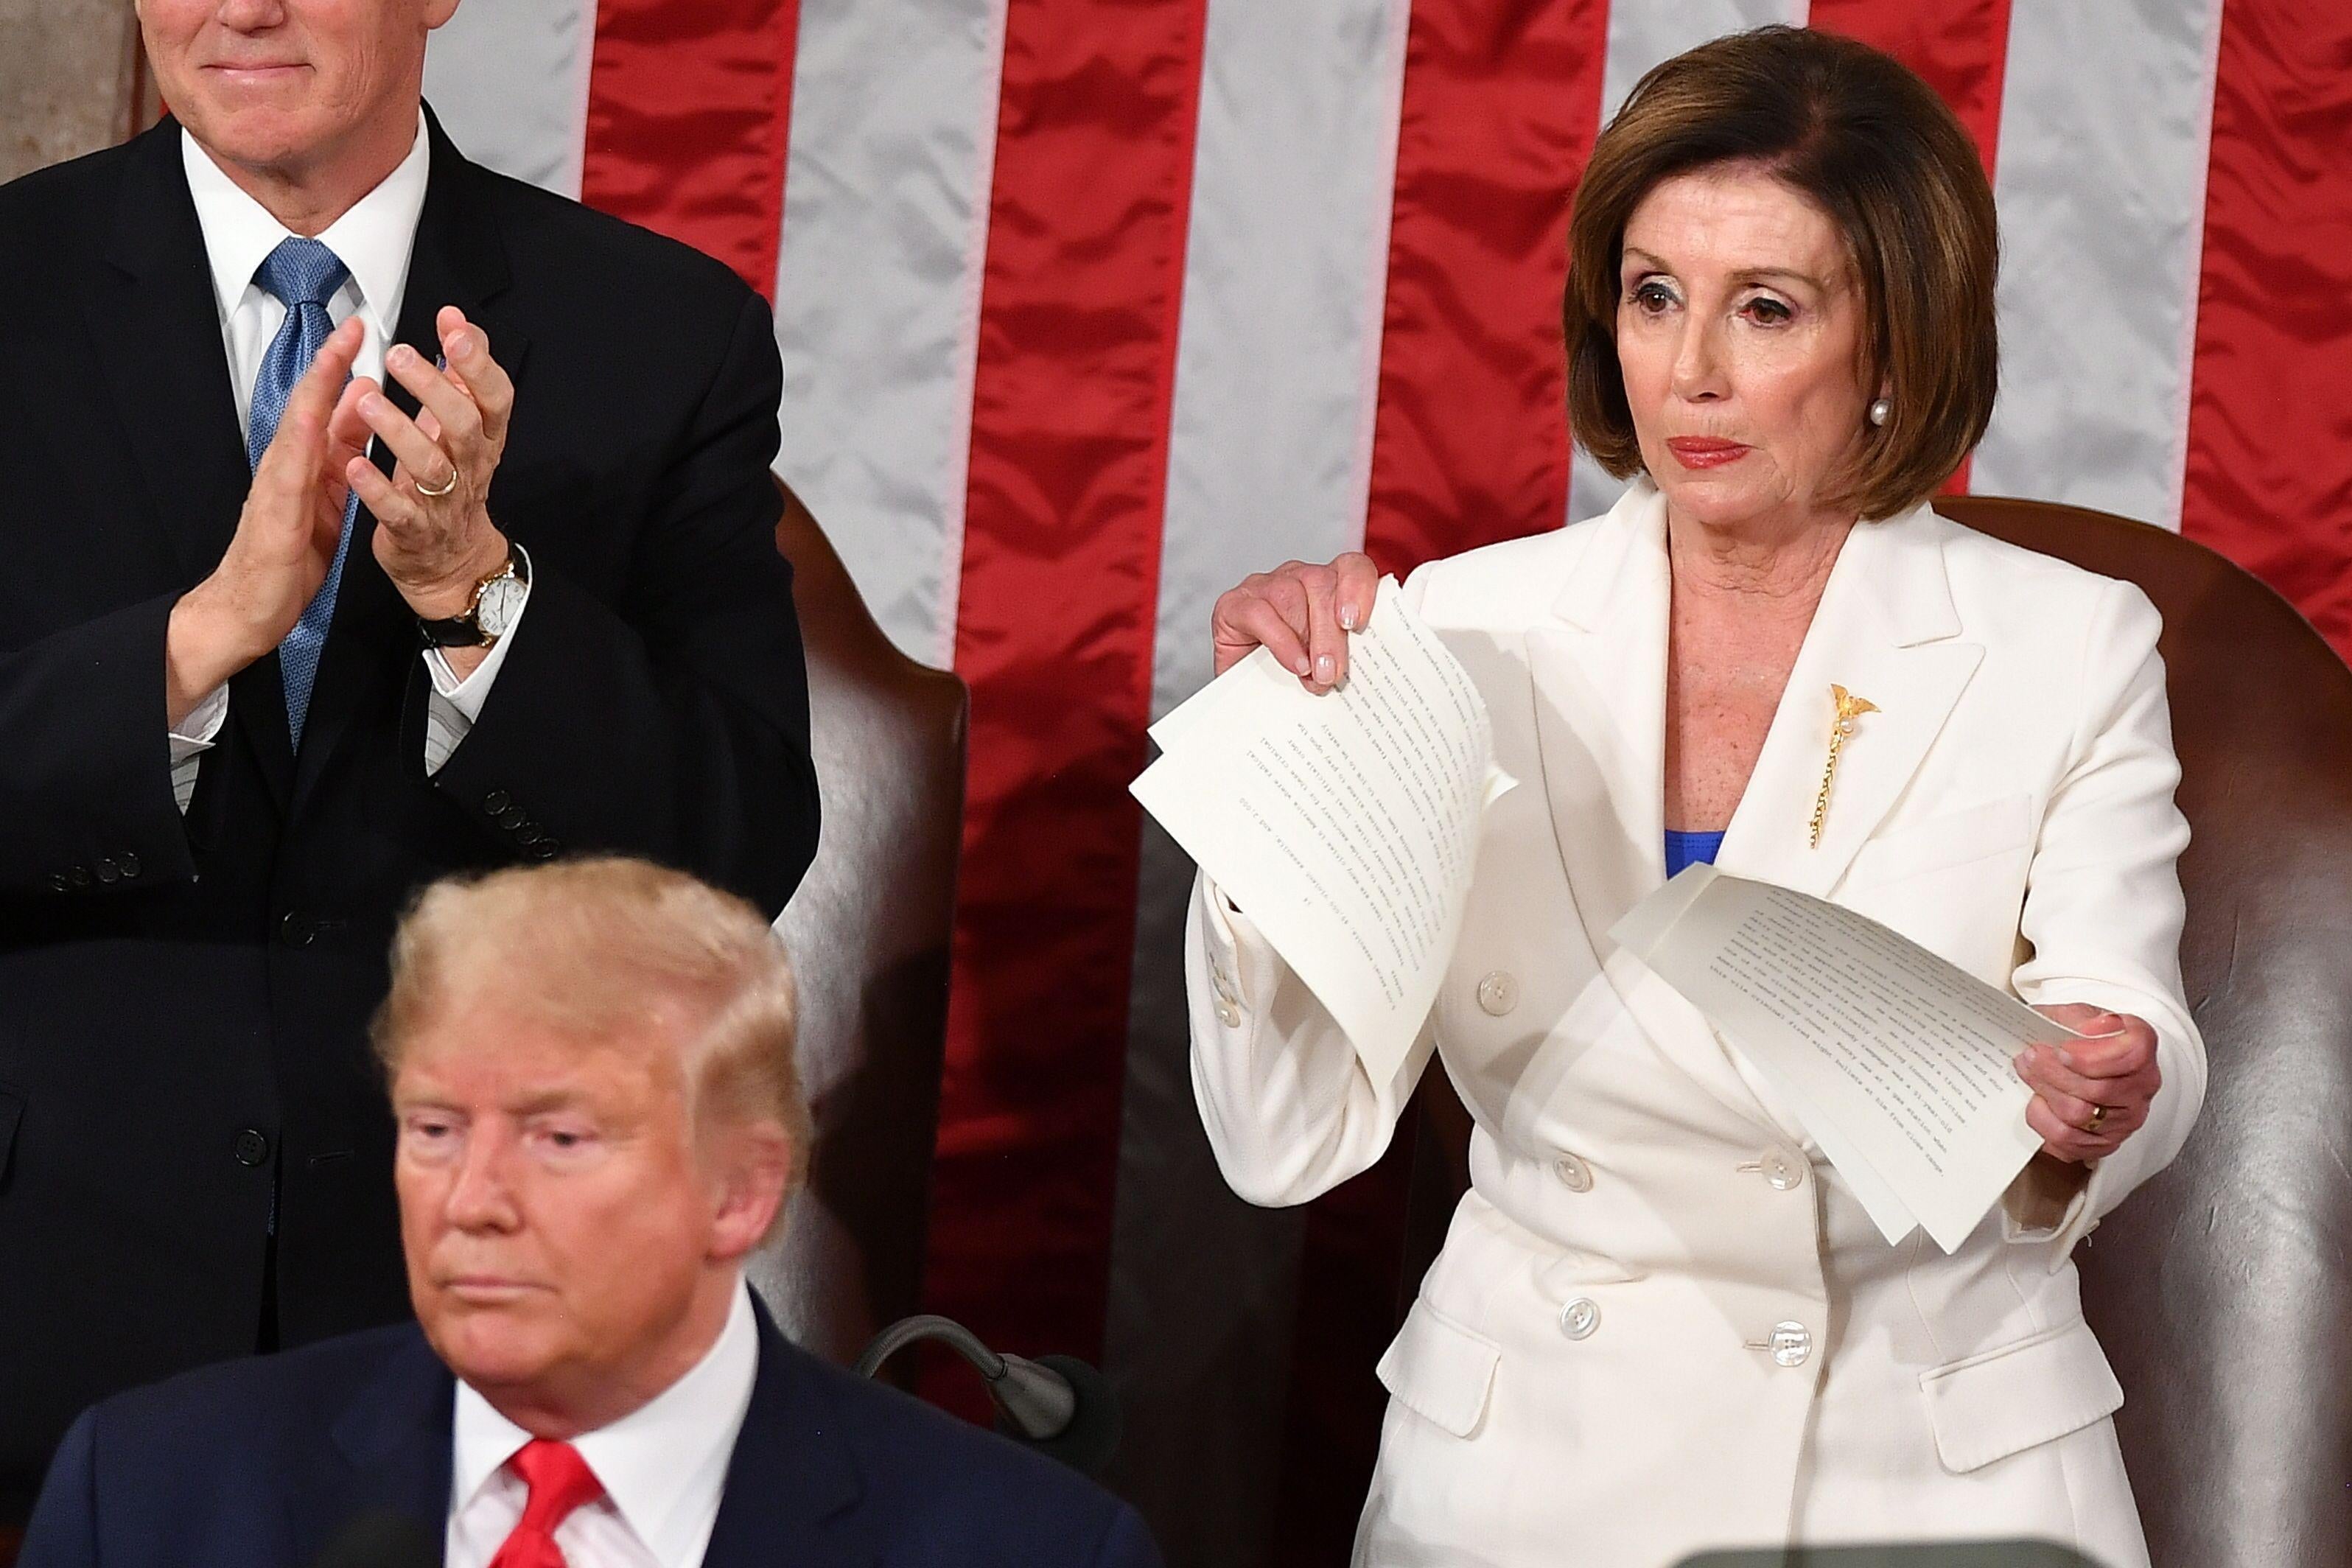 Nancy Pelosi, standing behind Donald Trump, rips apart some sheets of paper.